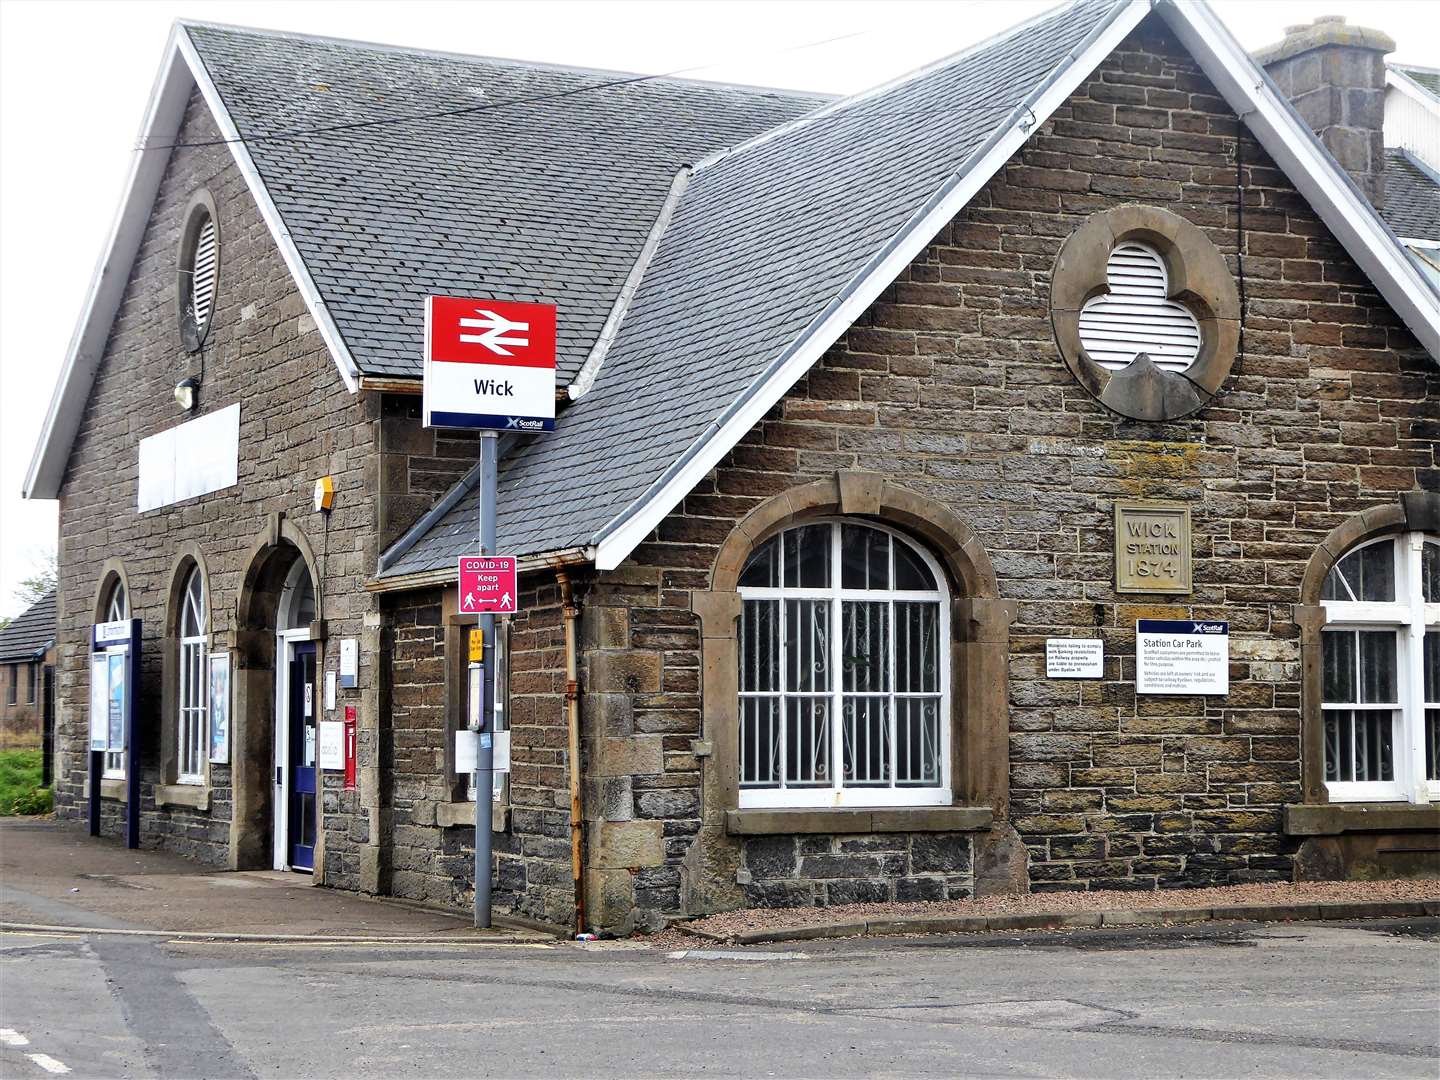 The offence occurred on the approach to Wick railway station.